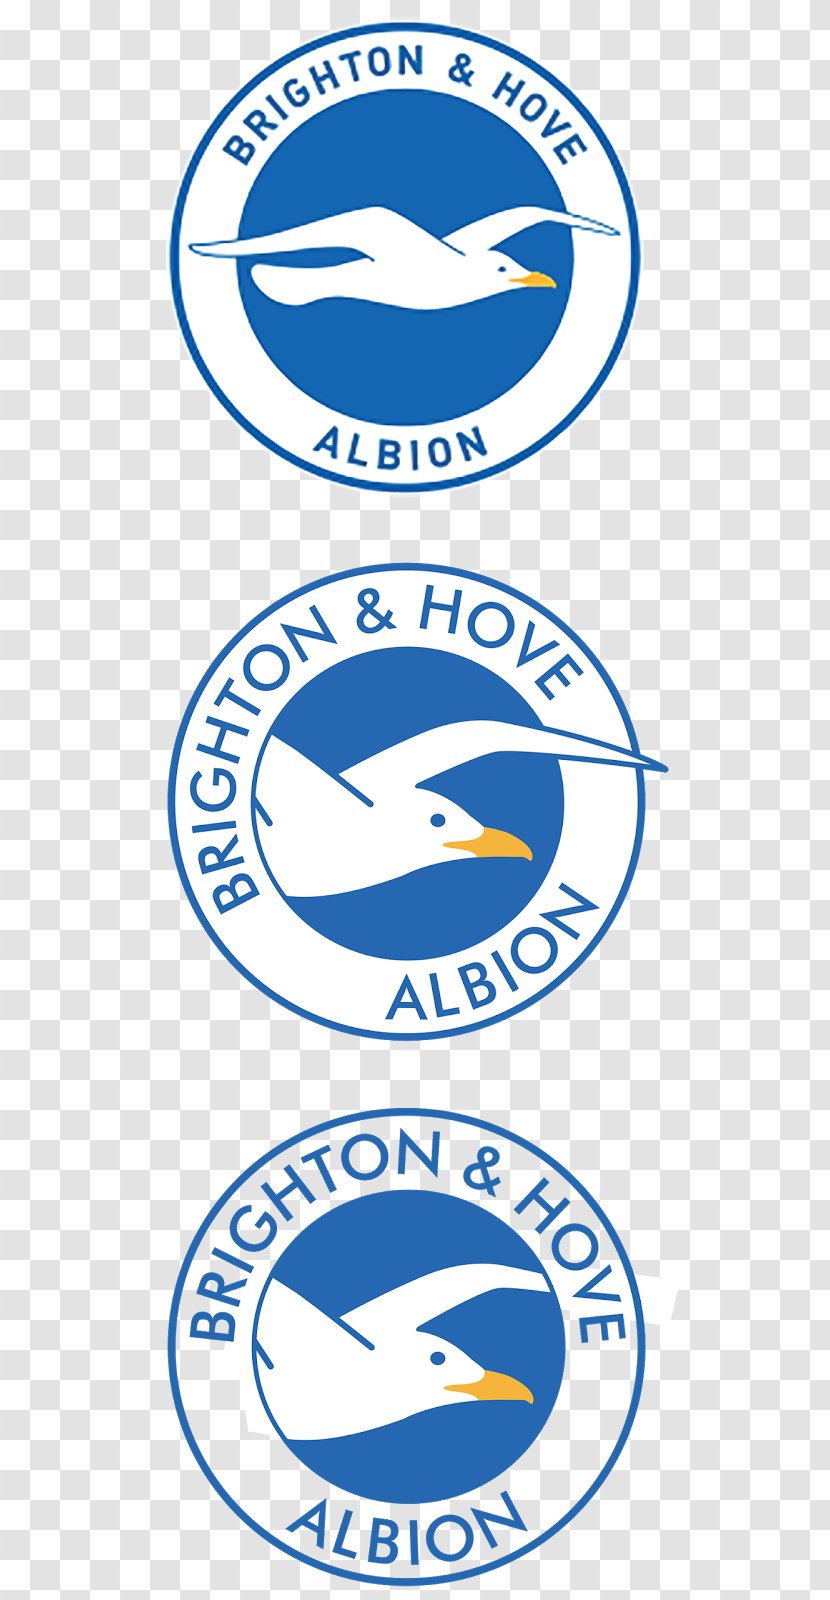 Brighton & Hove Albion F.C. Logo Trademark Brand - Limited Company - Hole In The Wall Transparent PNG